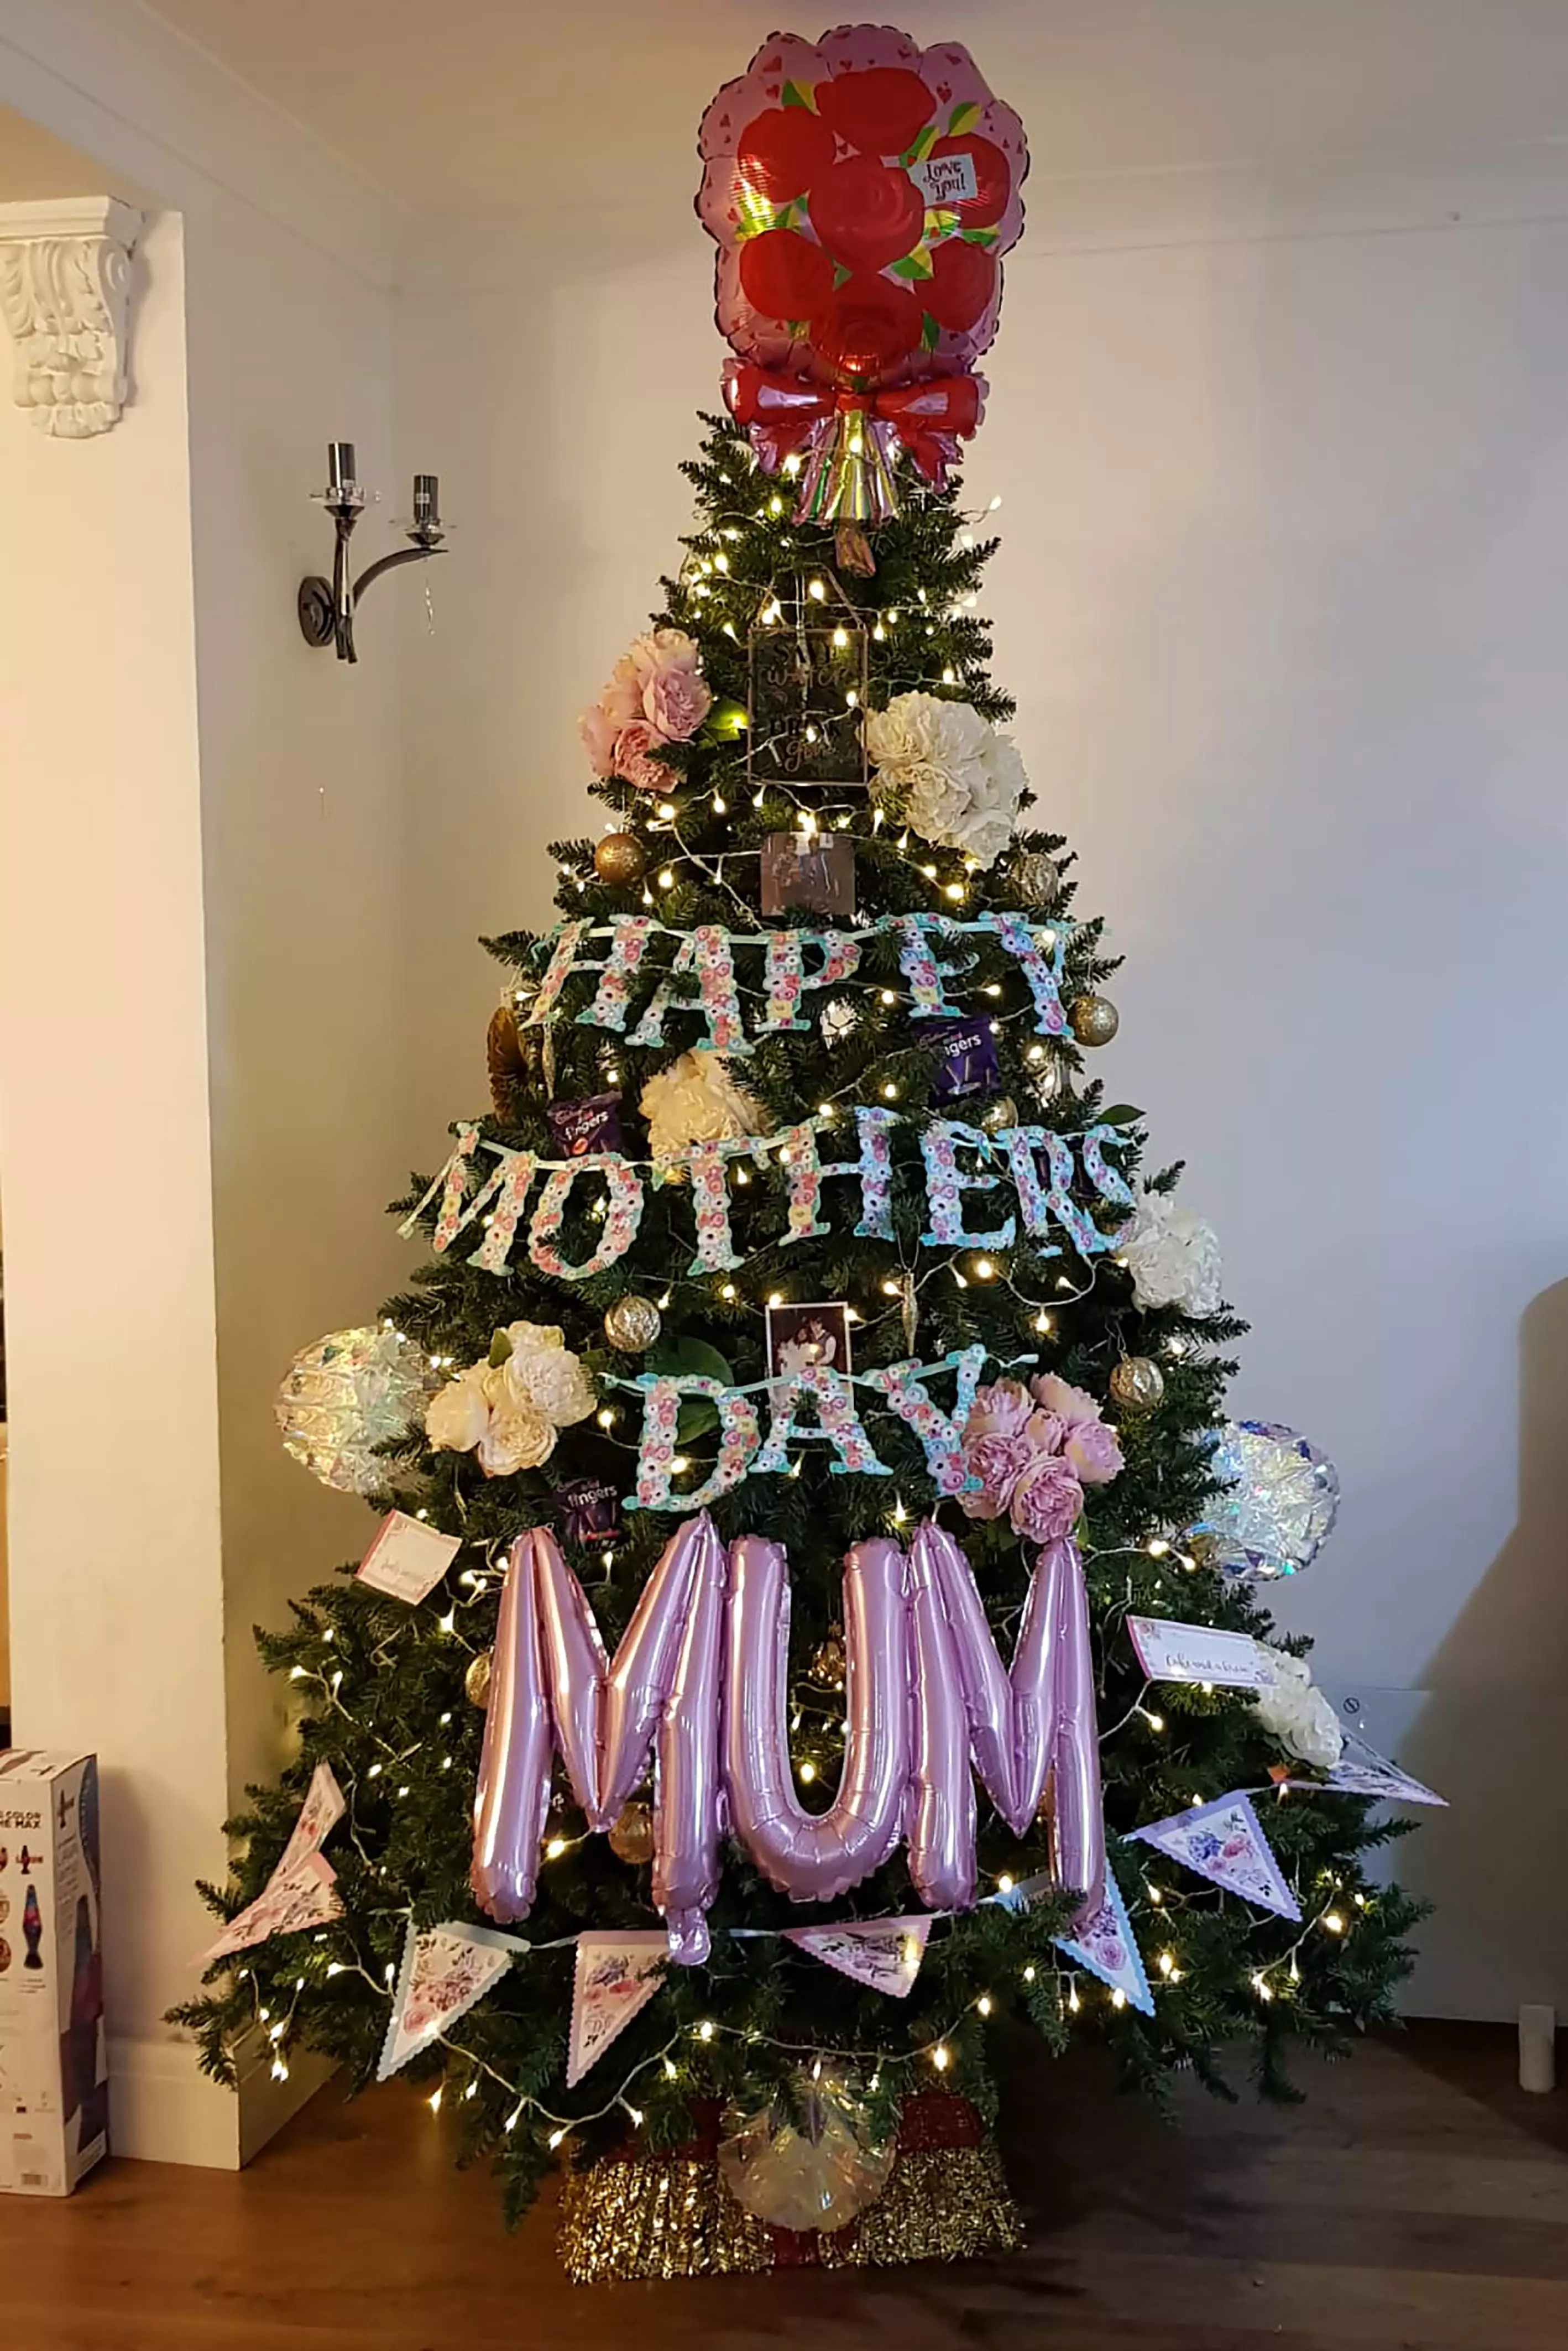 A Mother's Day tree anyone? (